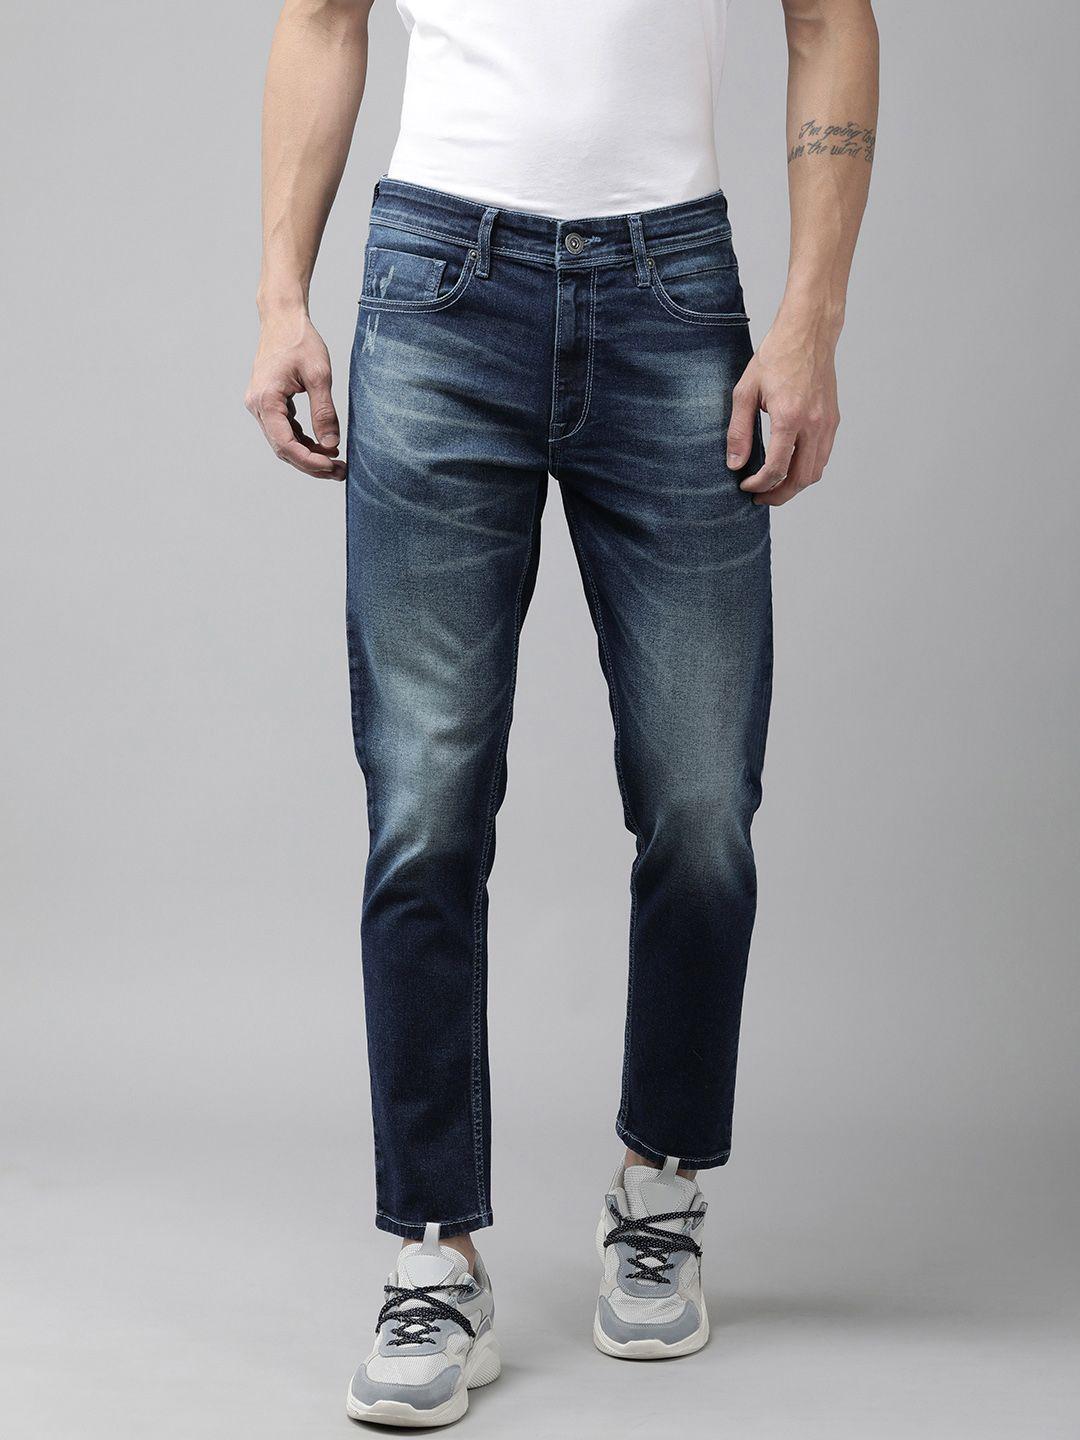 beat london by pepe jeans men skinny fit heavy fade stretchable jeans